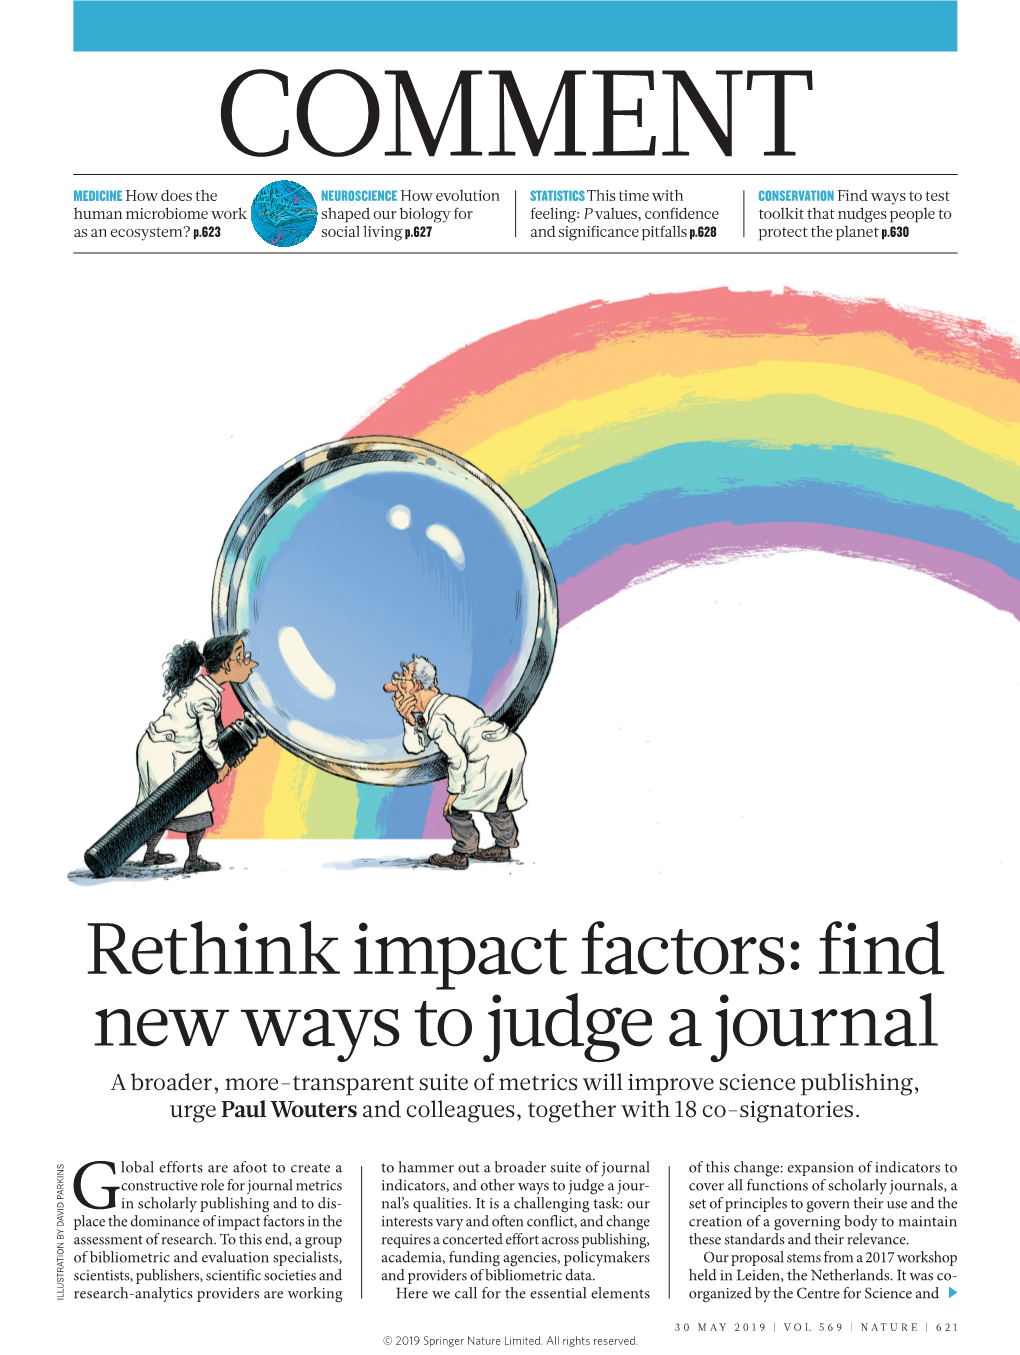 Rethink Impact Factors: Find New Ways to Judge a Journal